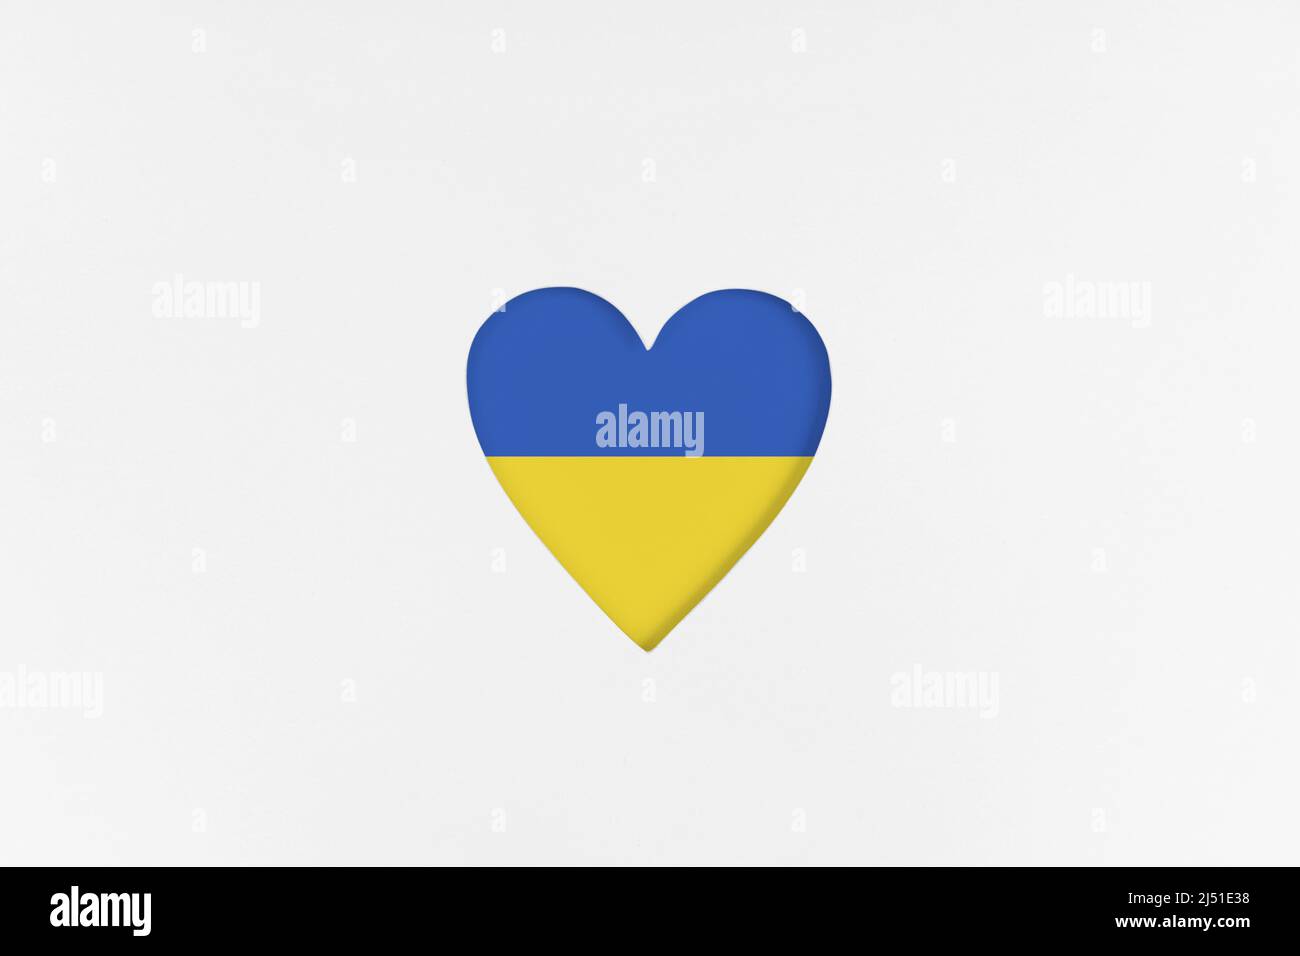 Ukraine flag on Heart shape isolated on white cardboard background. Printed cardboard with die-cut heart shape. Top view Stock Photo